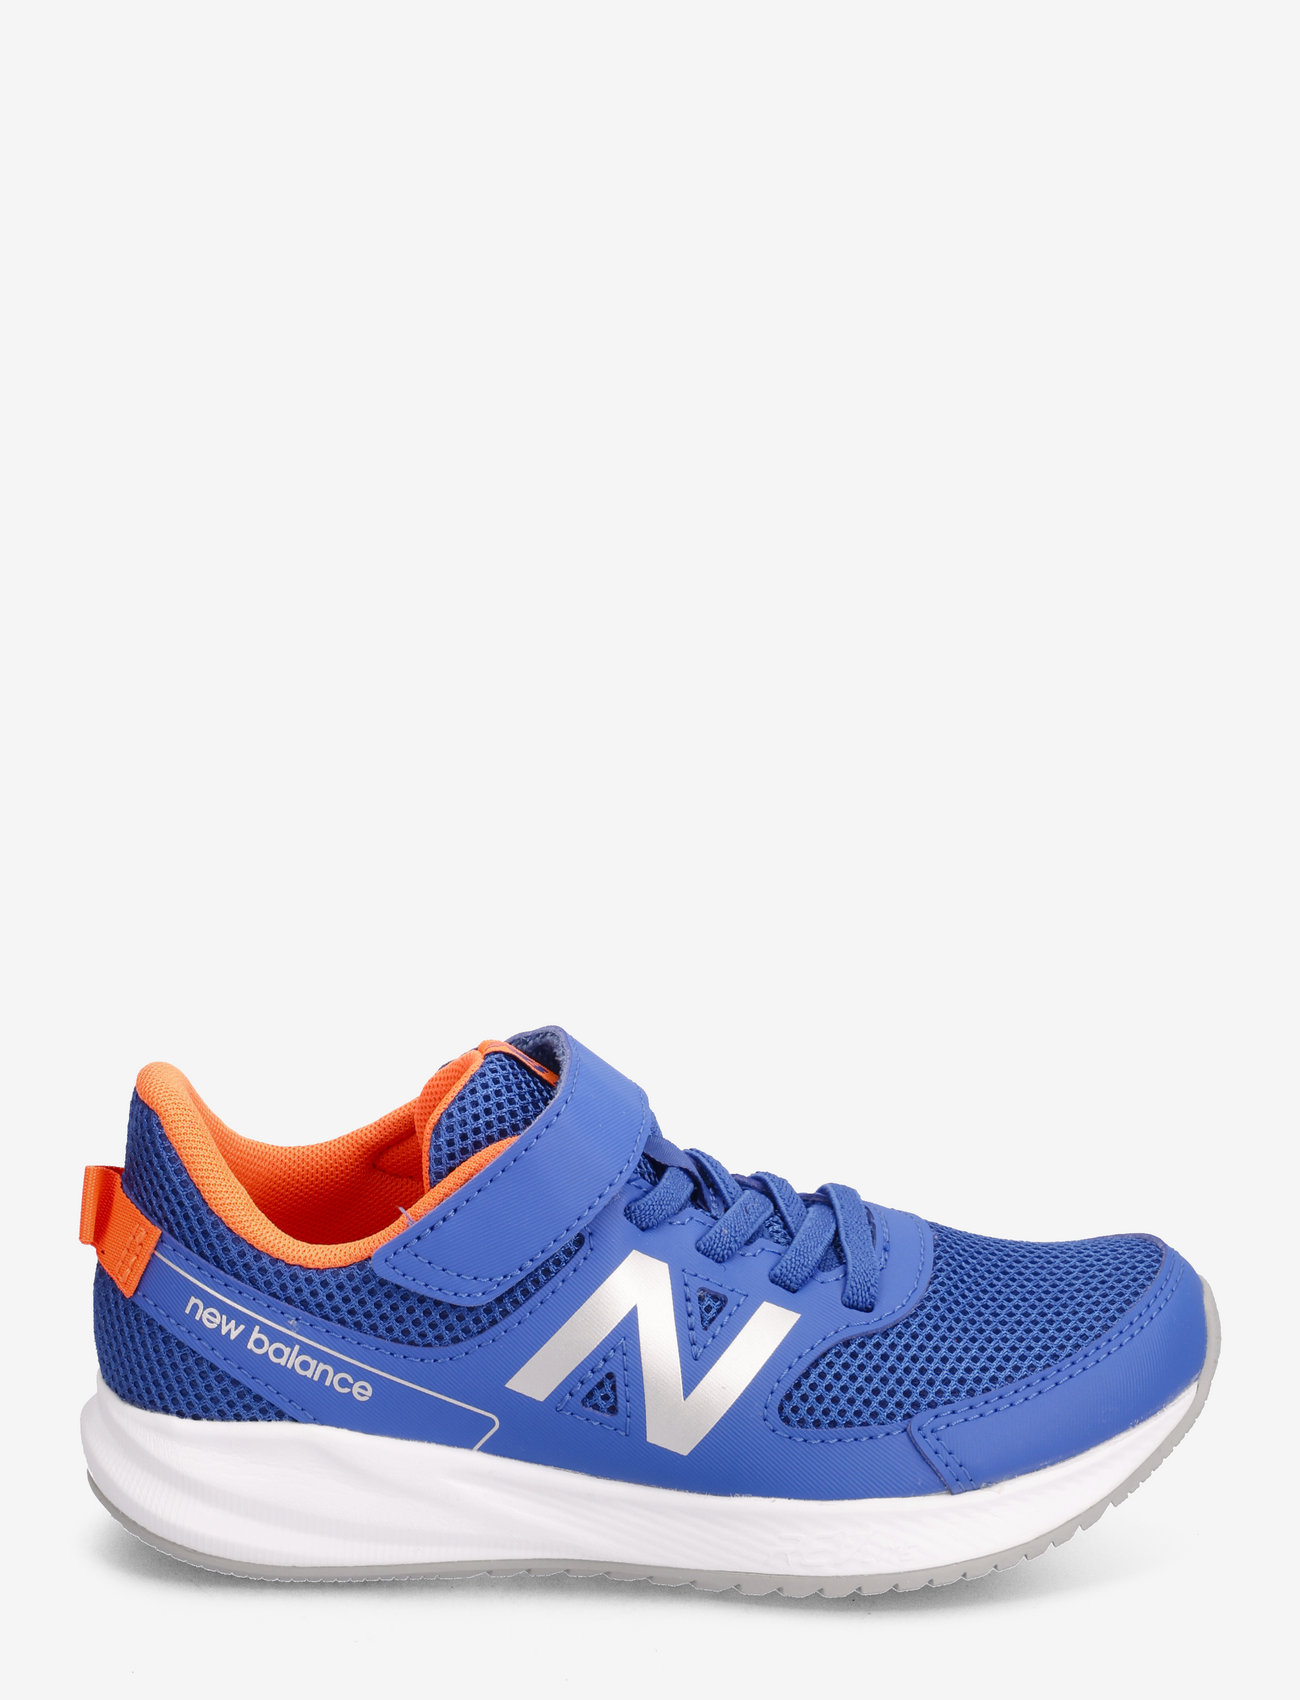 New Balance - 570v3 Bungee Lace with Hook and Loop Top Strap - laufschuhe - cobalt - 1